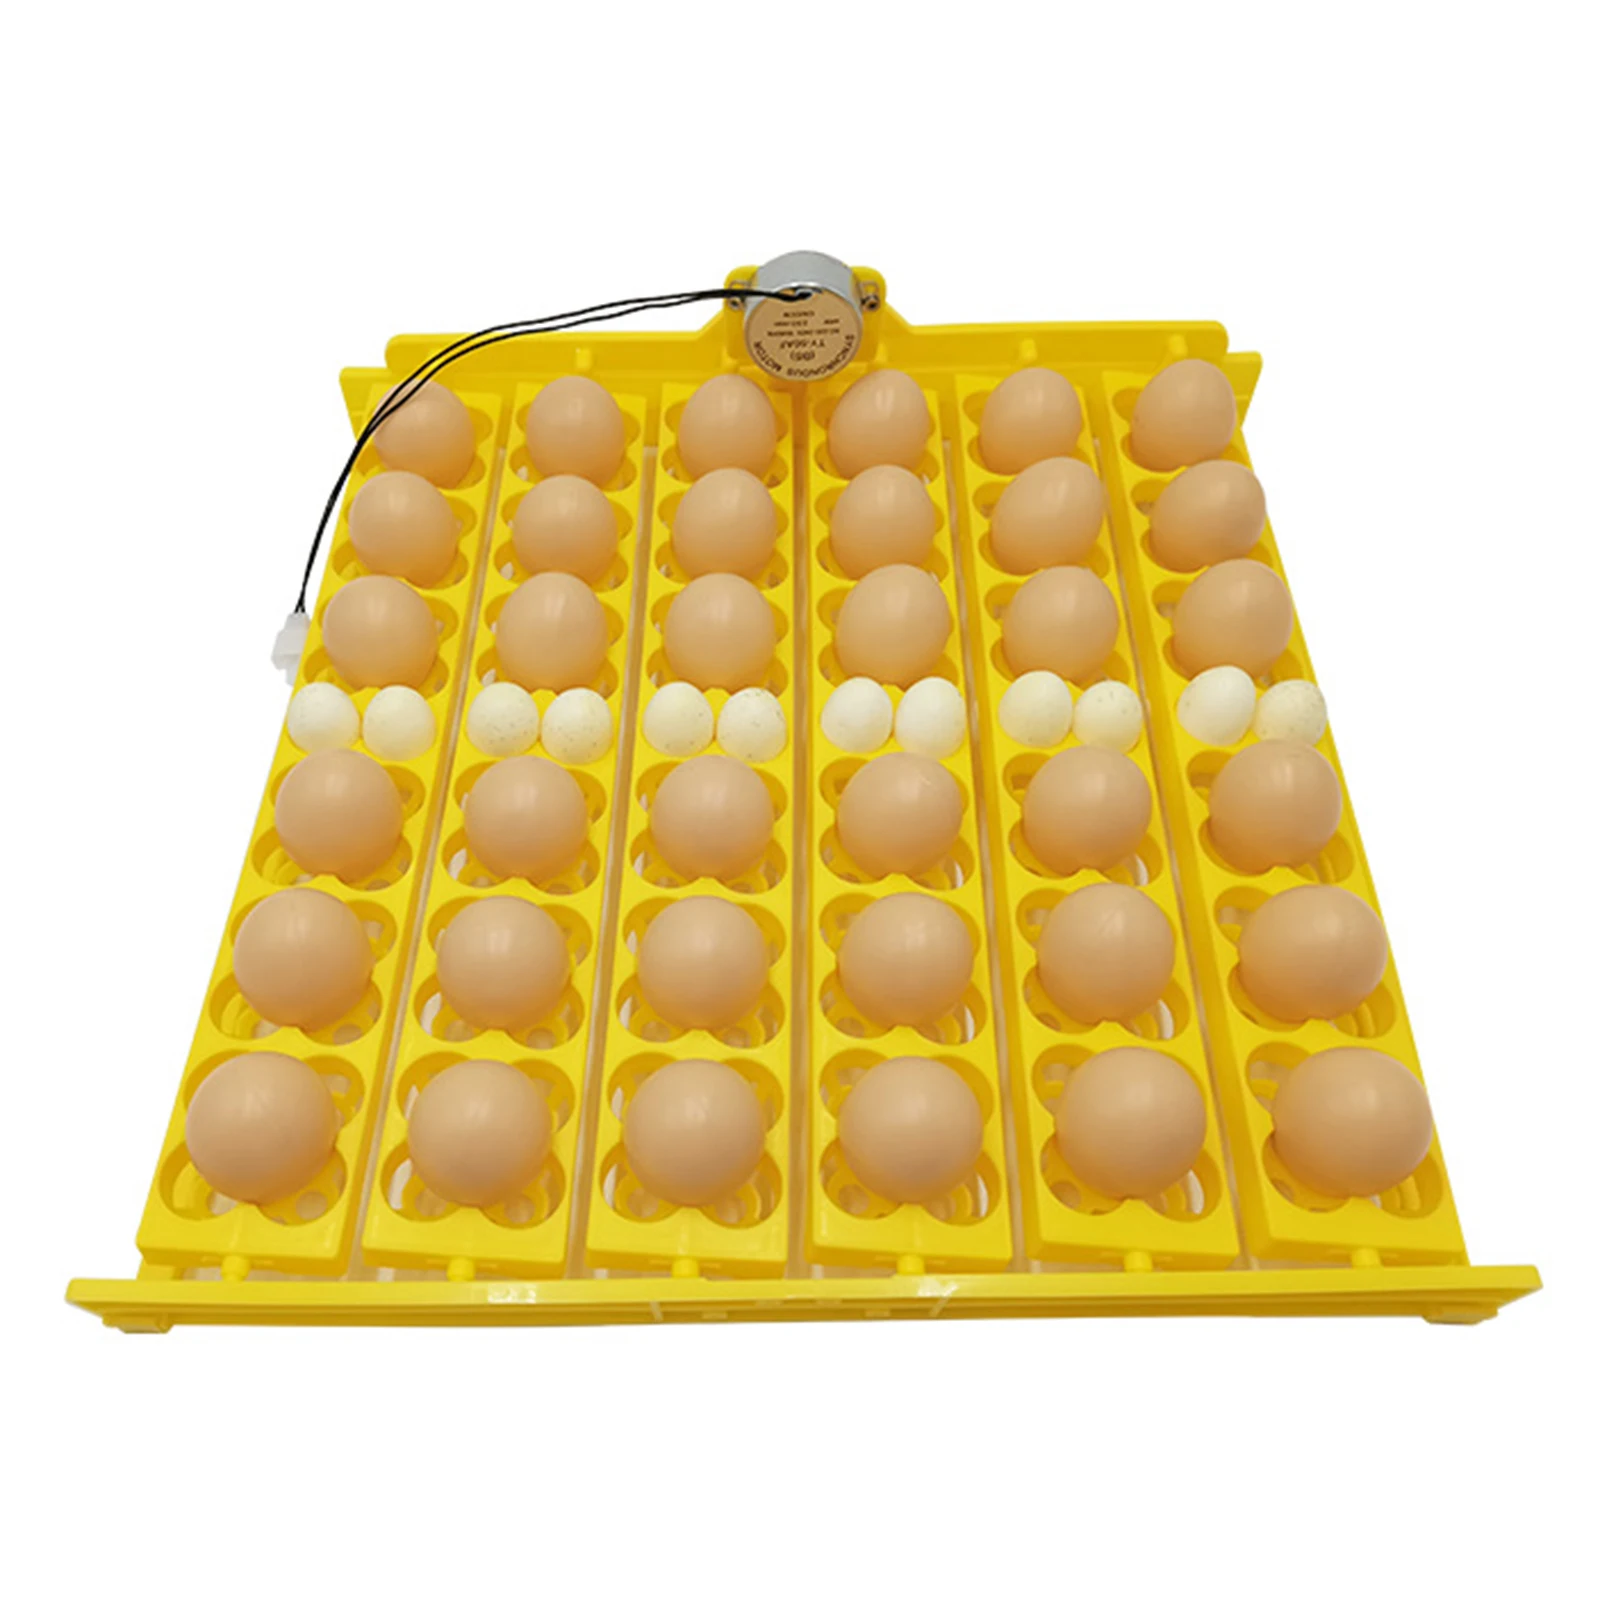 Eggs Incubator Automatic Turning Tray with Motor Farm Poultry Hatching Device for 36 Chicken Eggs, or 156 Quail Eggs, EU Type